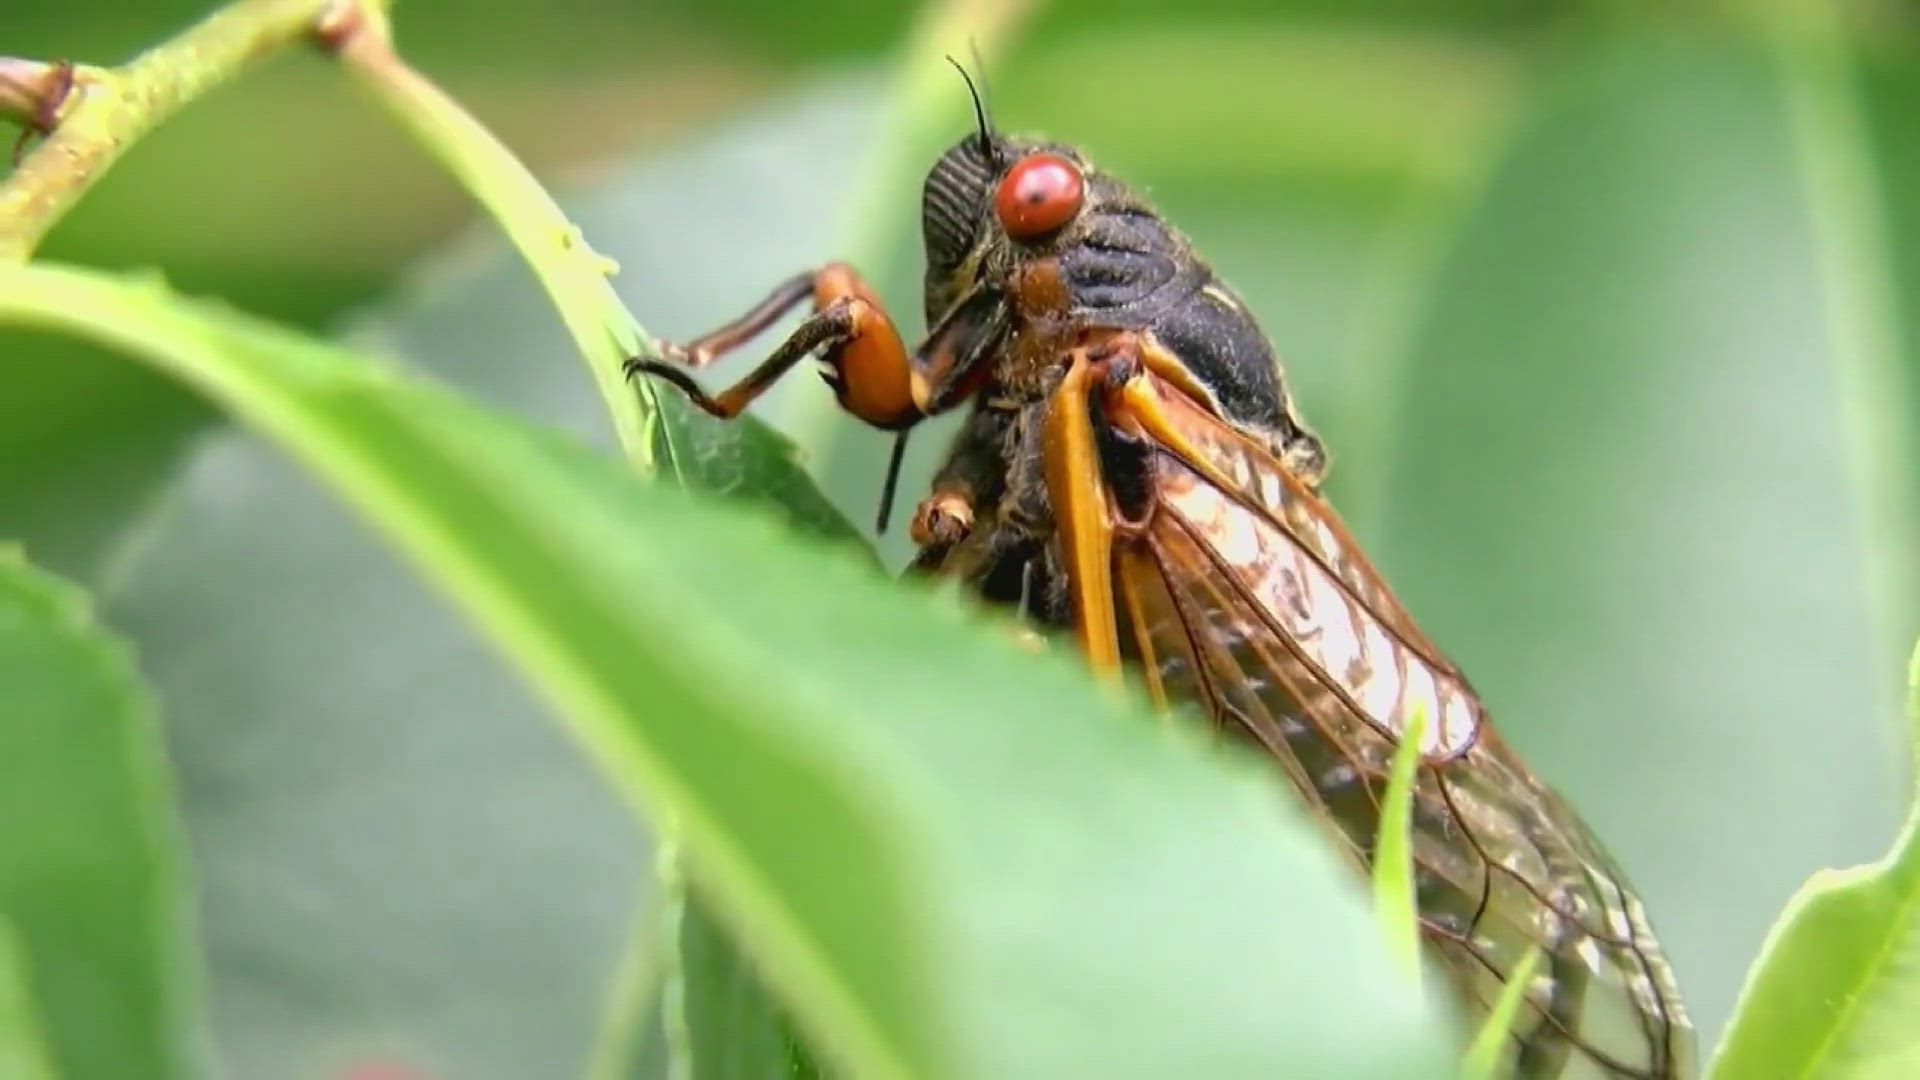 NC State professor answers your questions about the historic cicada emergence happening this year.